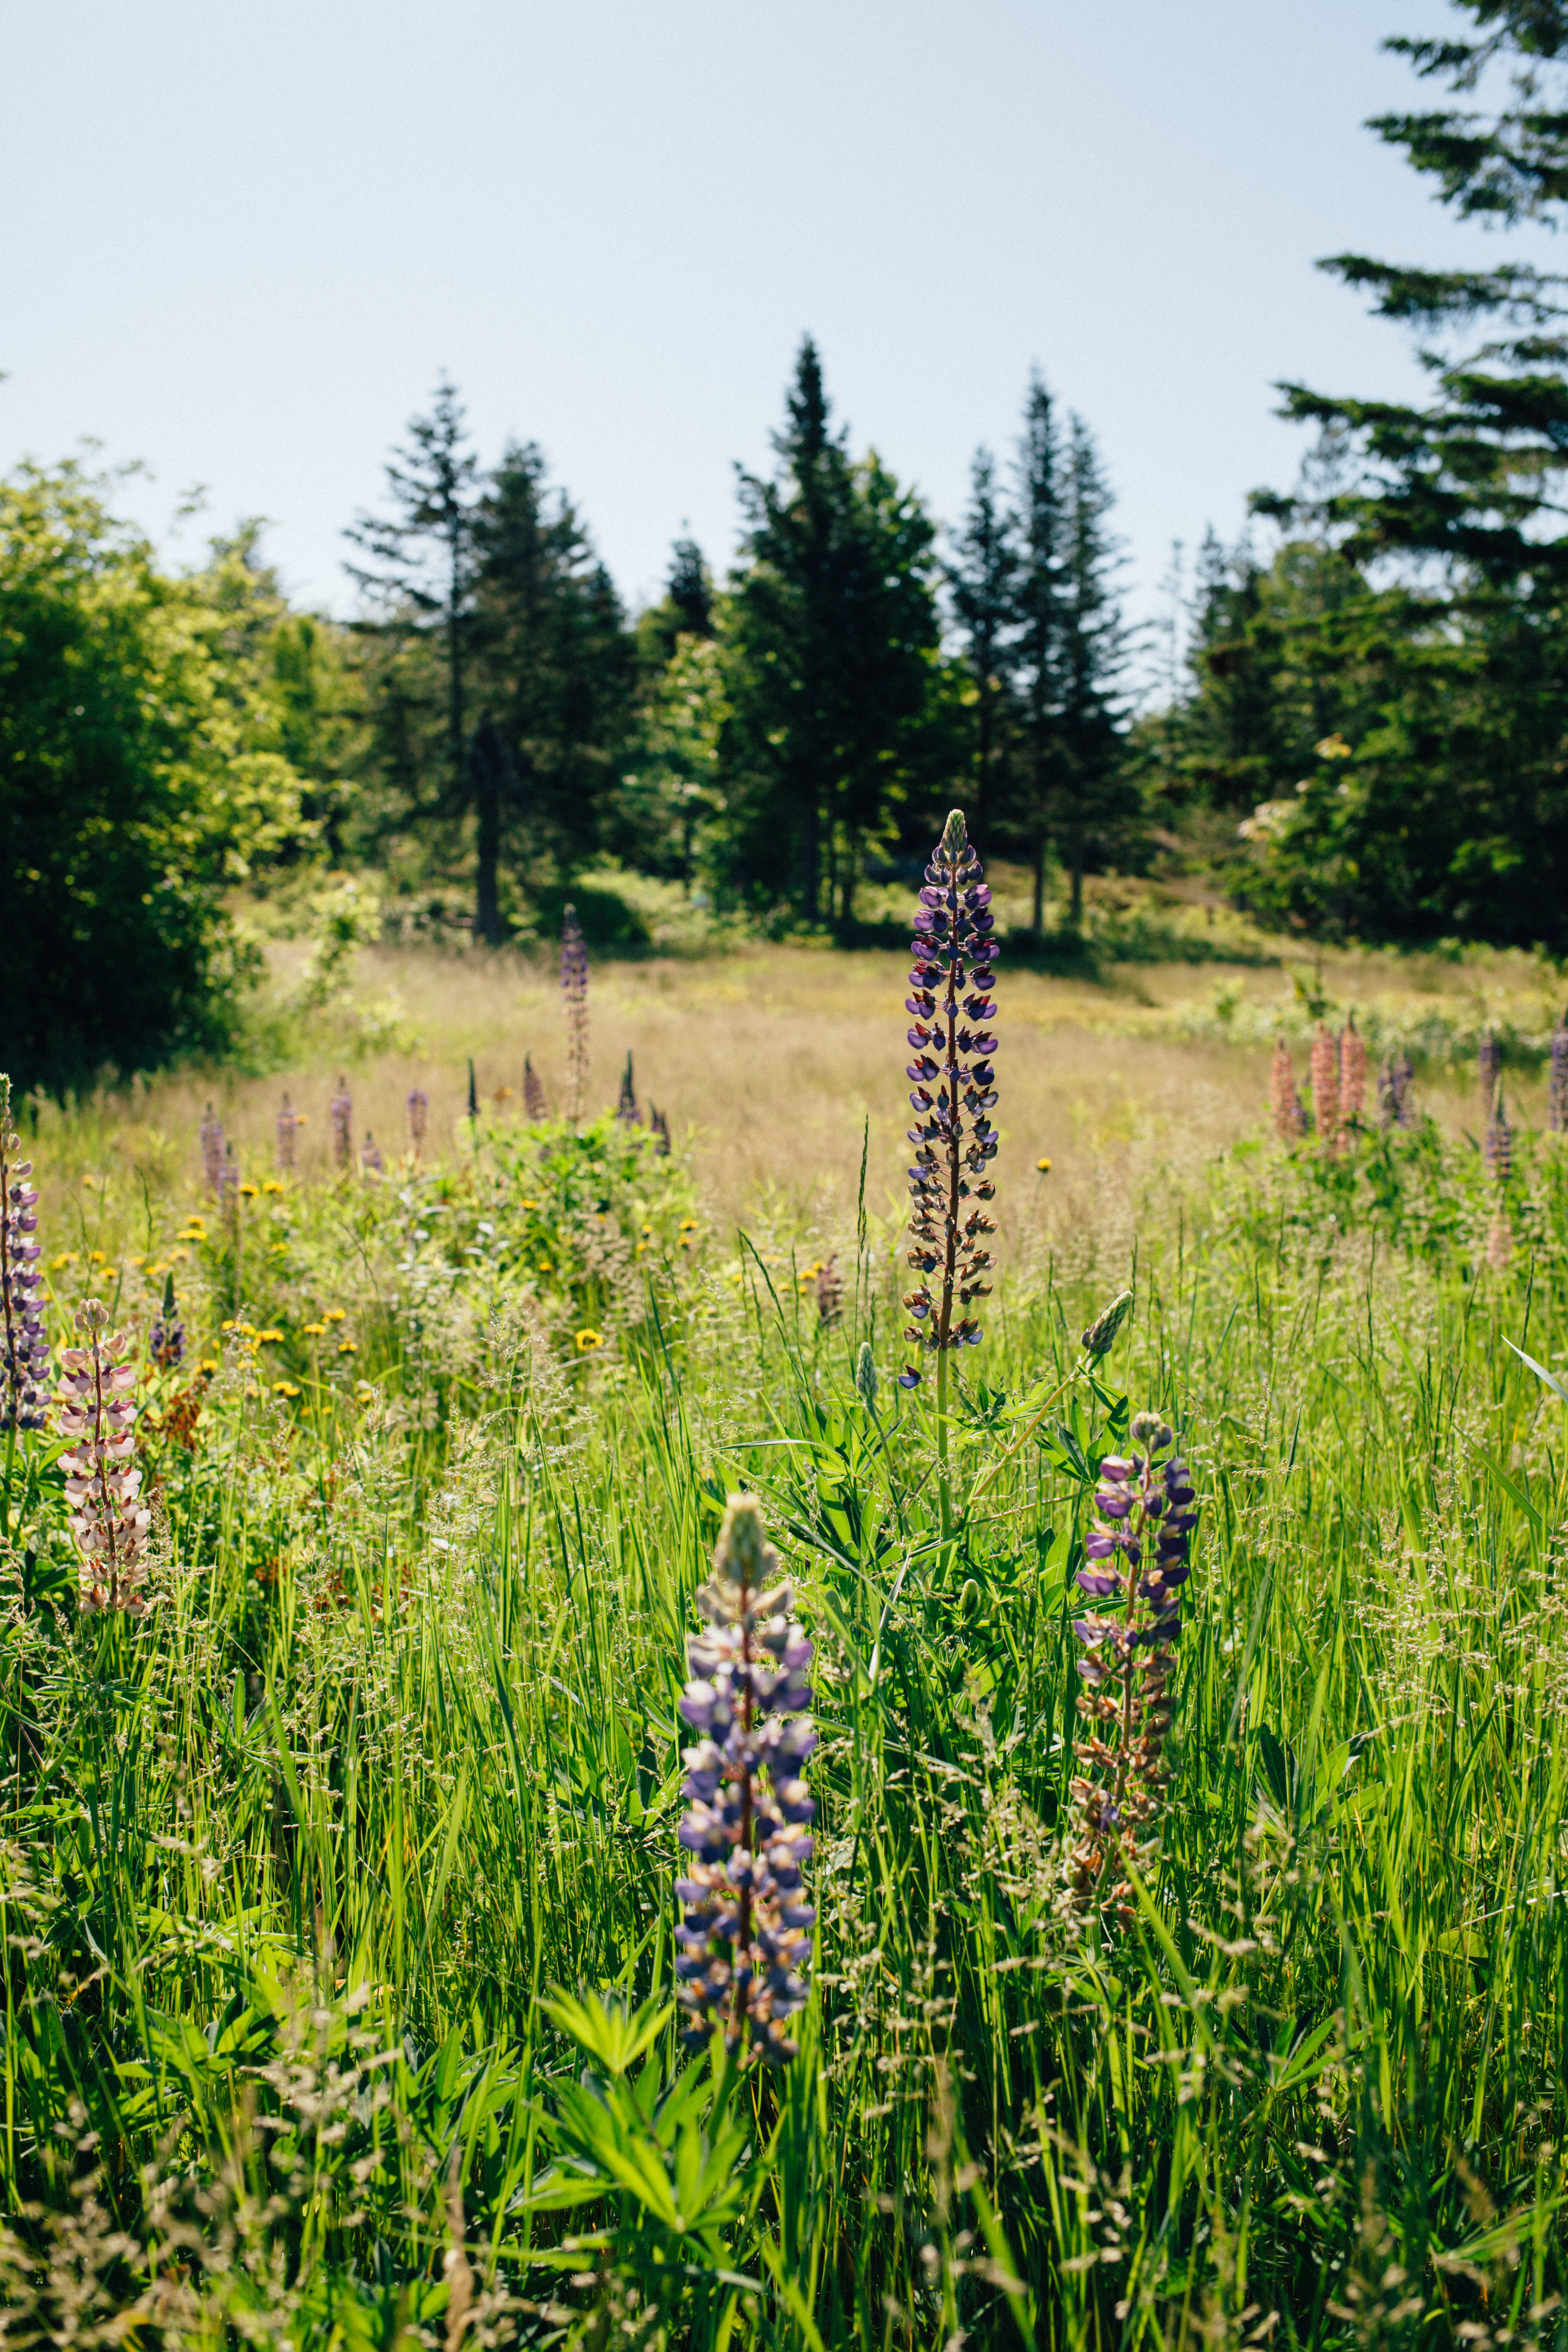 lupines in June/July, and many more wildflowers all summer long!